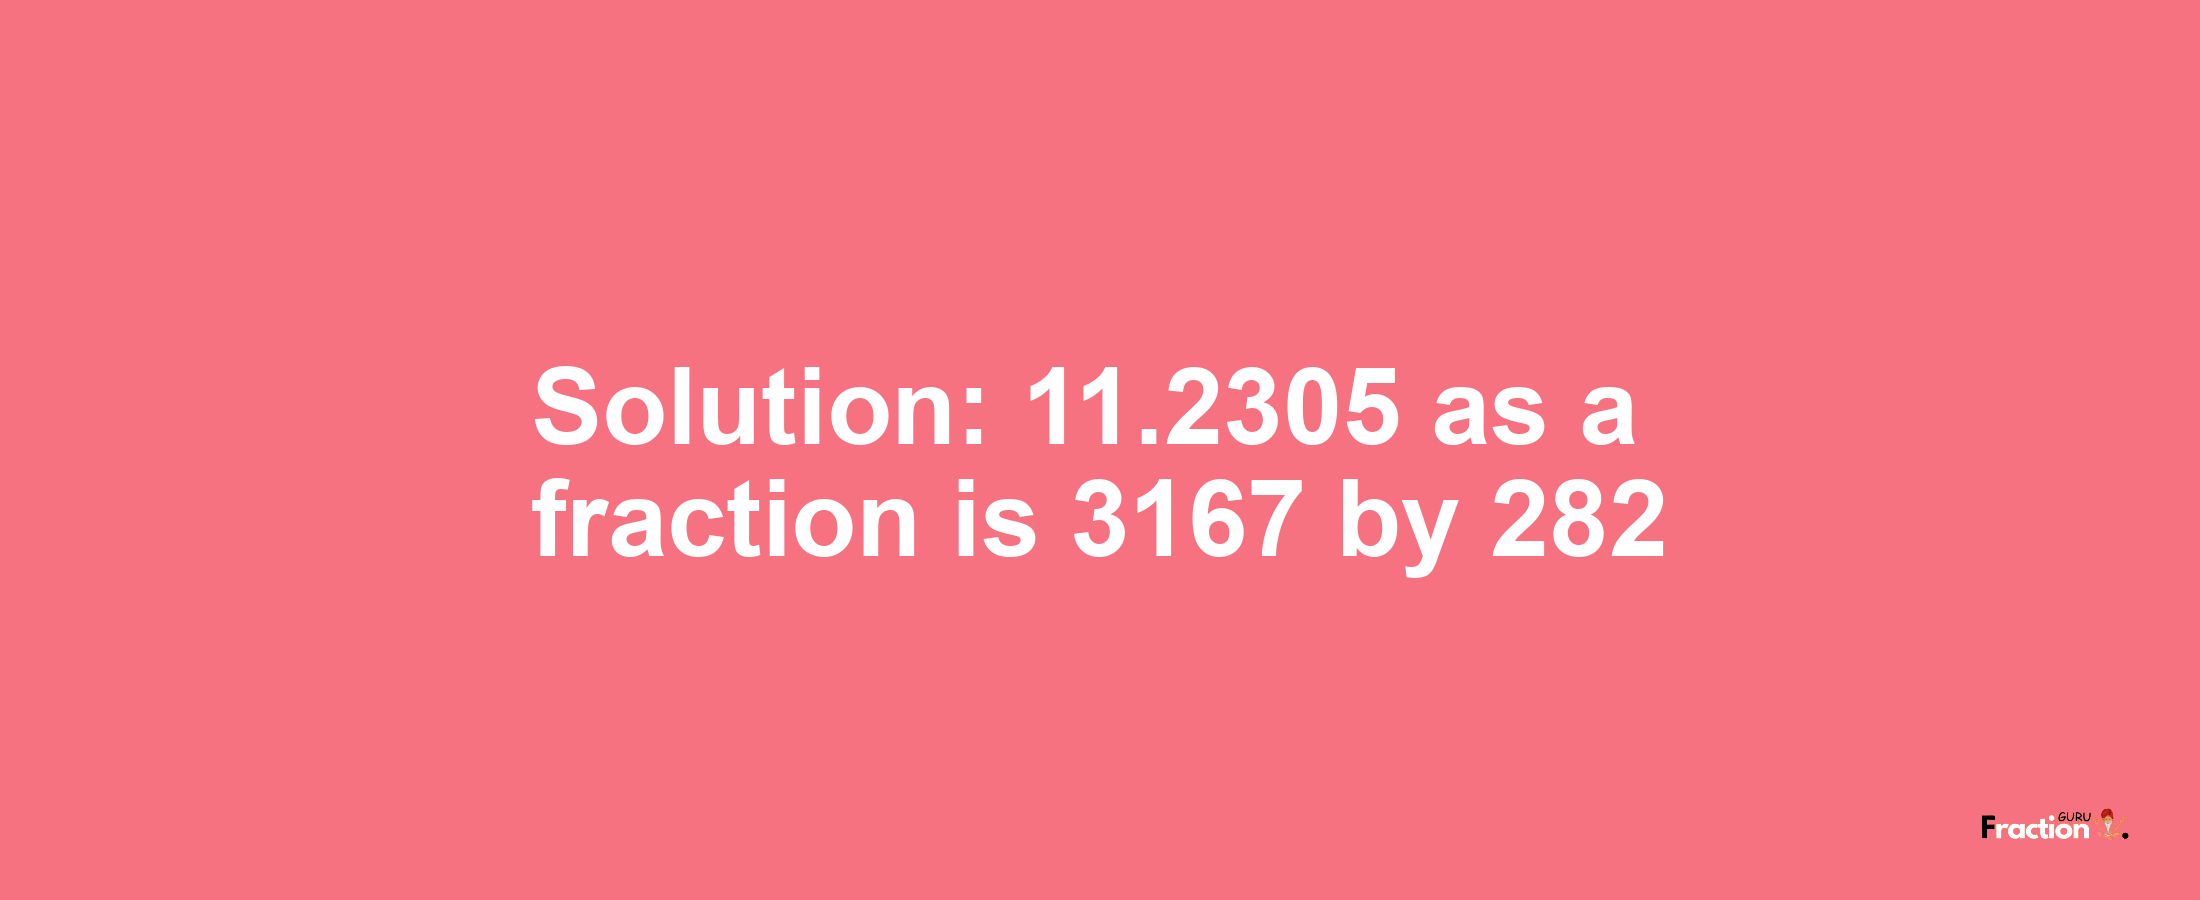 Solution:11.2305 as a fraction is 3167/282